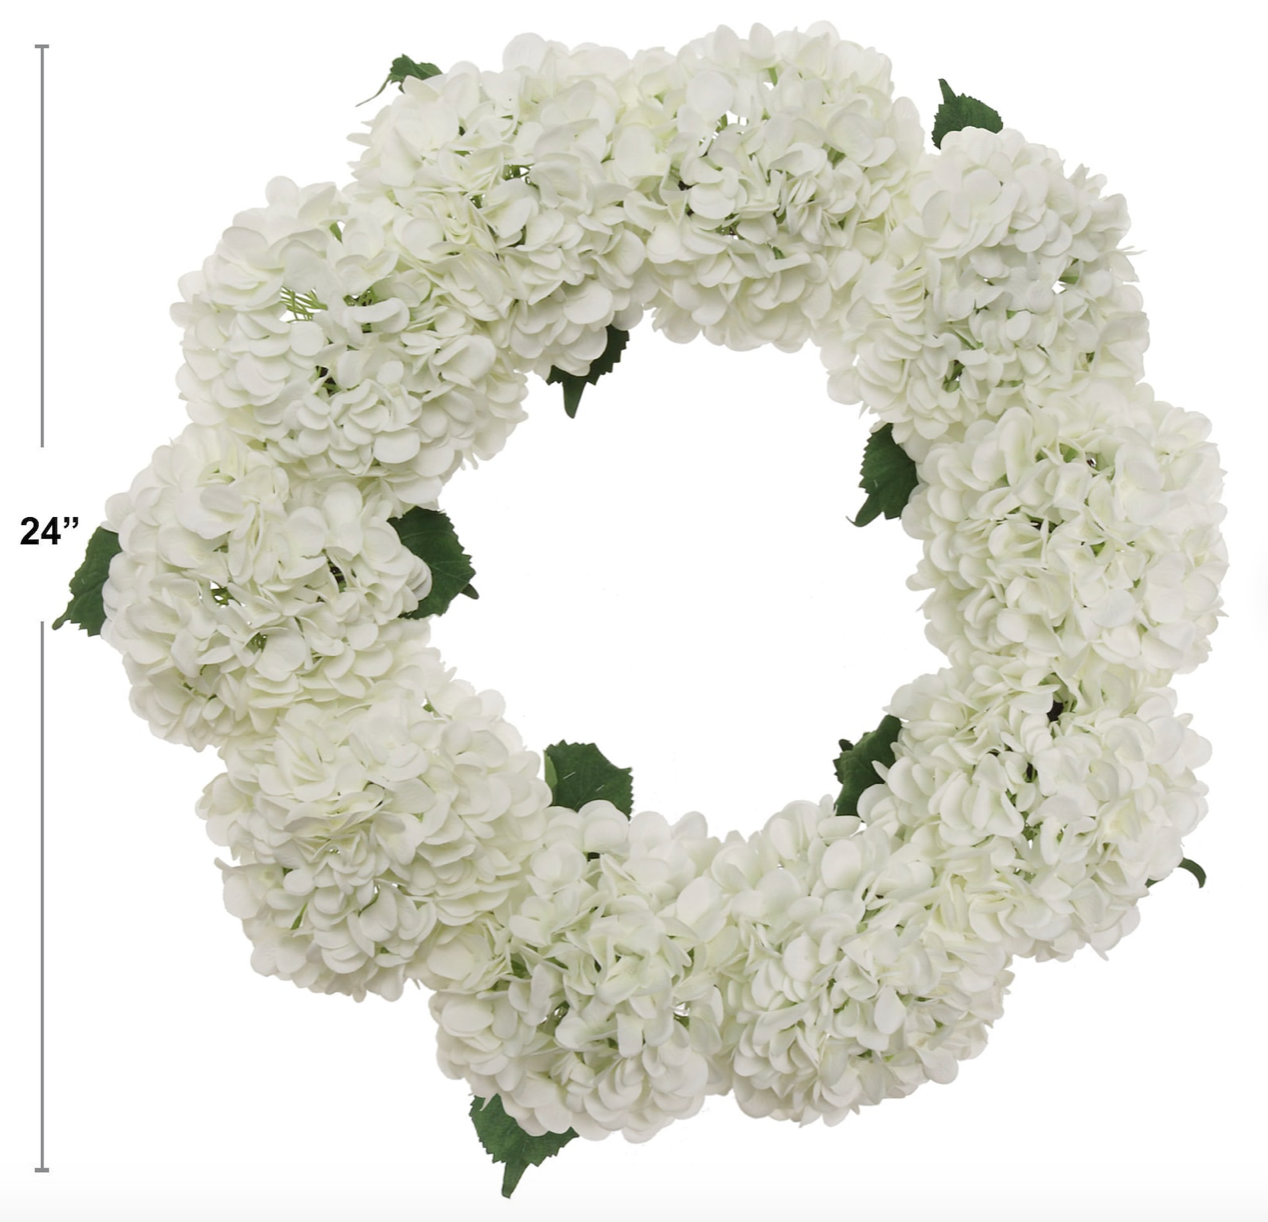 Artificial 24" White Hydrangea Wreath - Handcrafted, Uv Resistant, All-Season, Indoor/Outdoor Decor, Perfect For Home, Wedding, Event